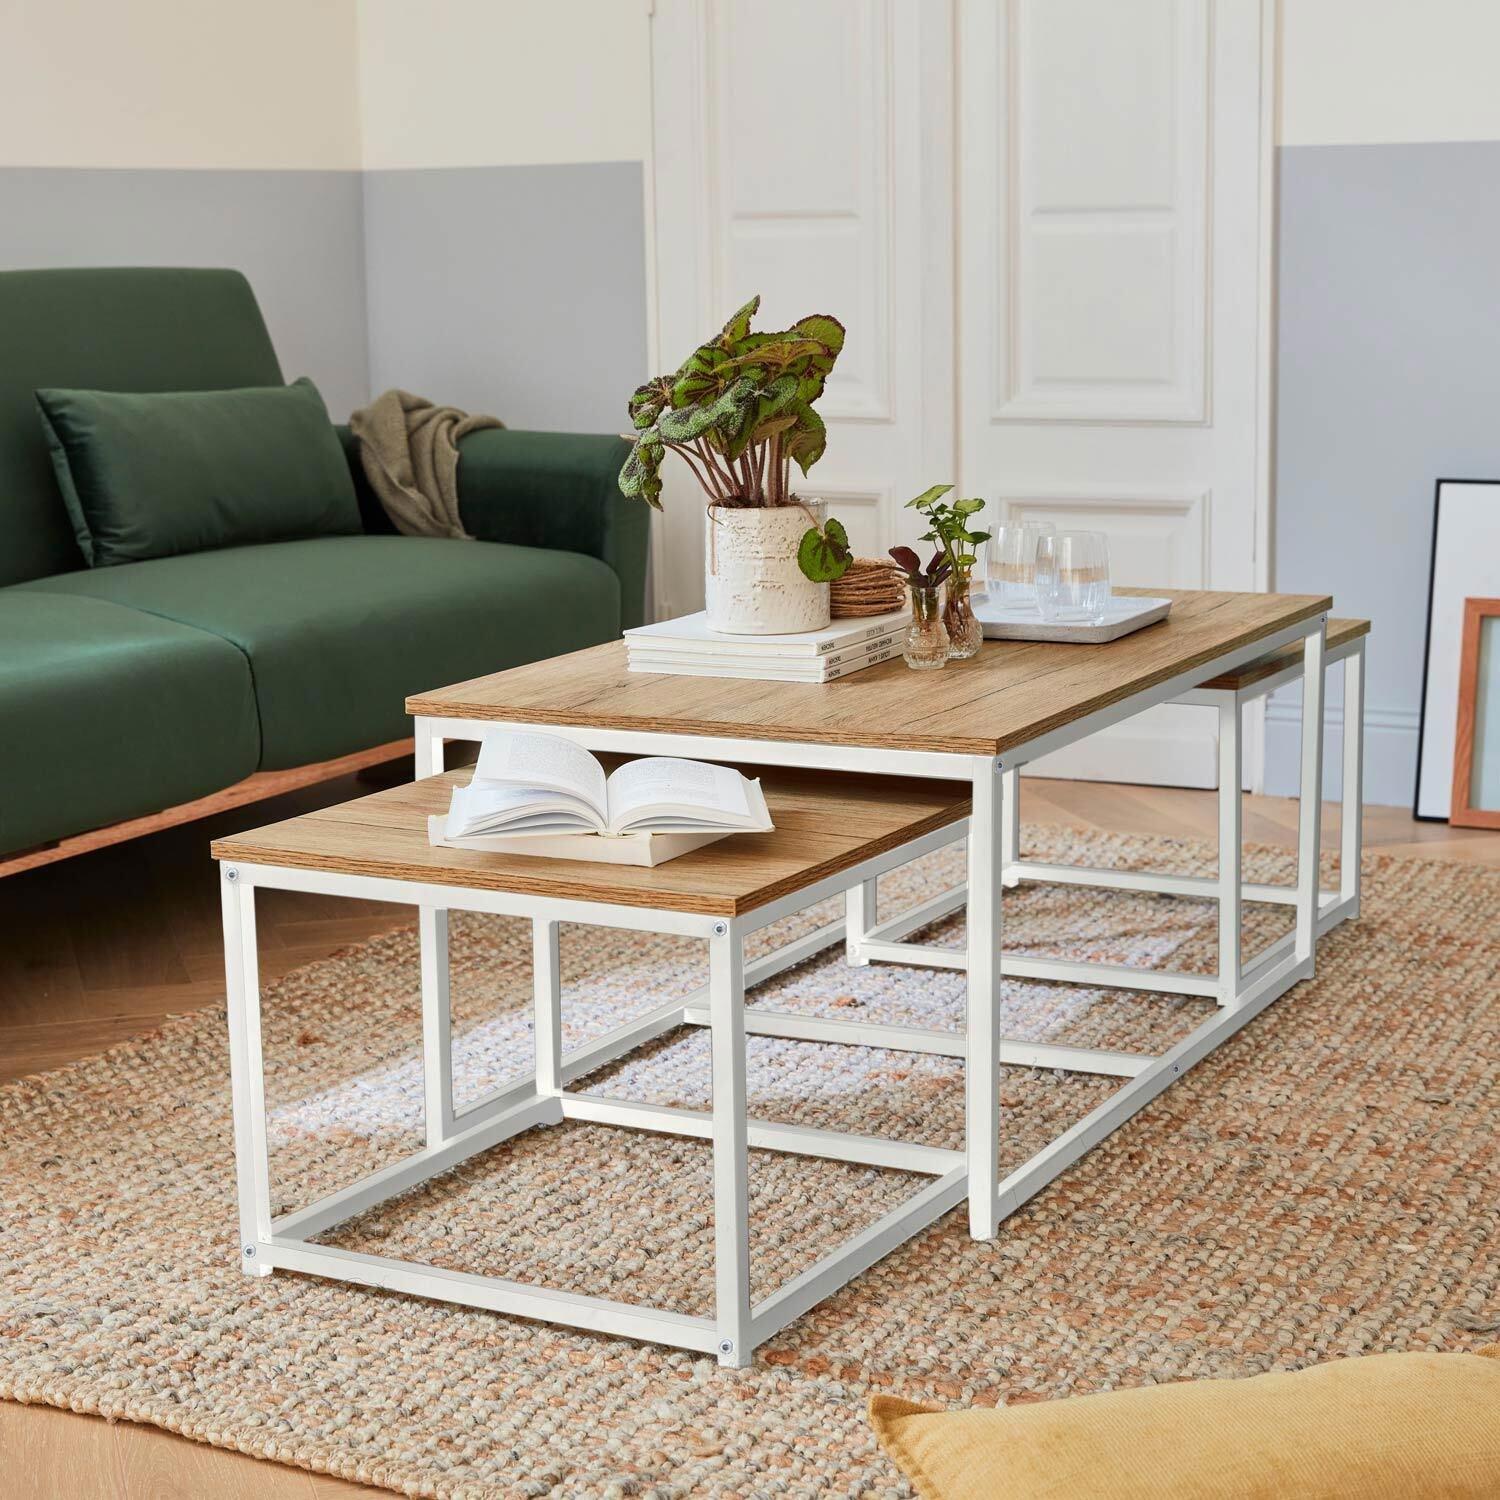 Set Of 3 Metal And Wood-effect Nesting Tables